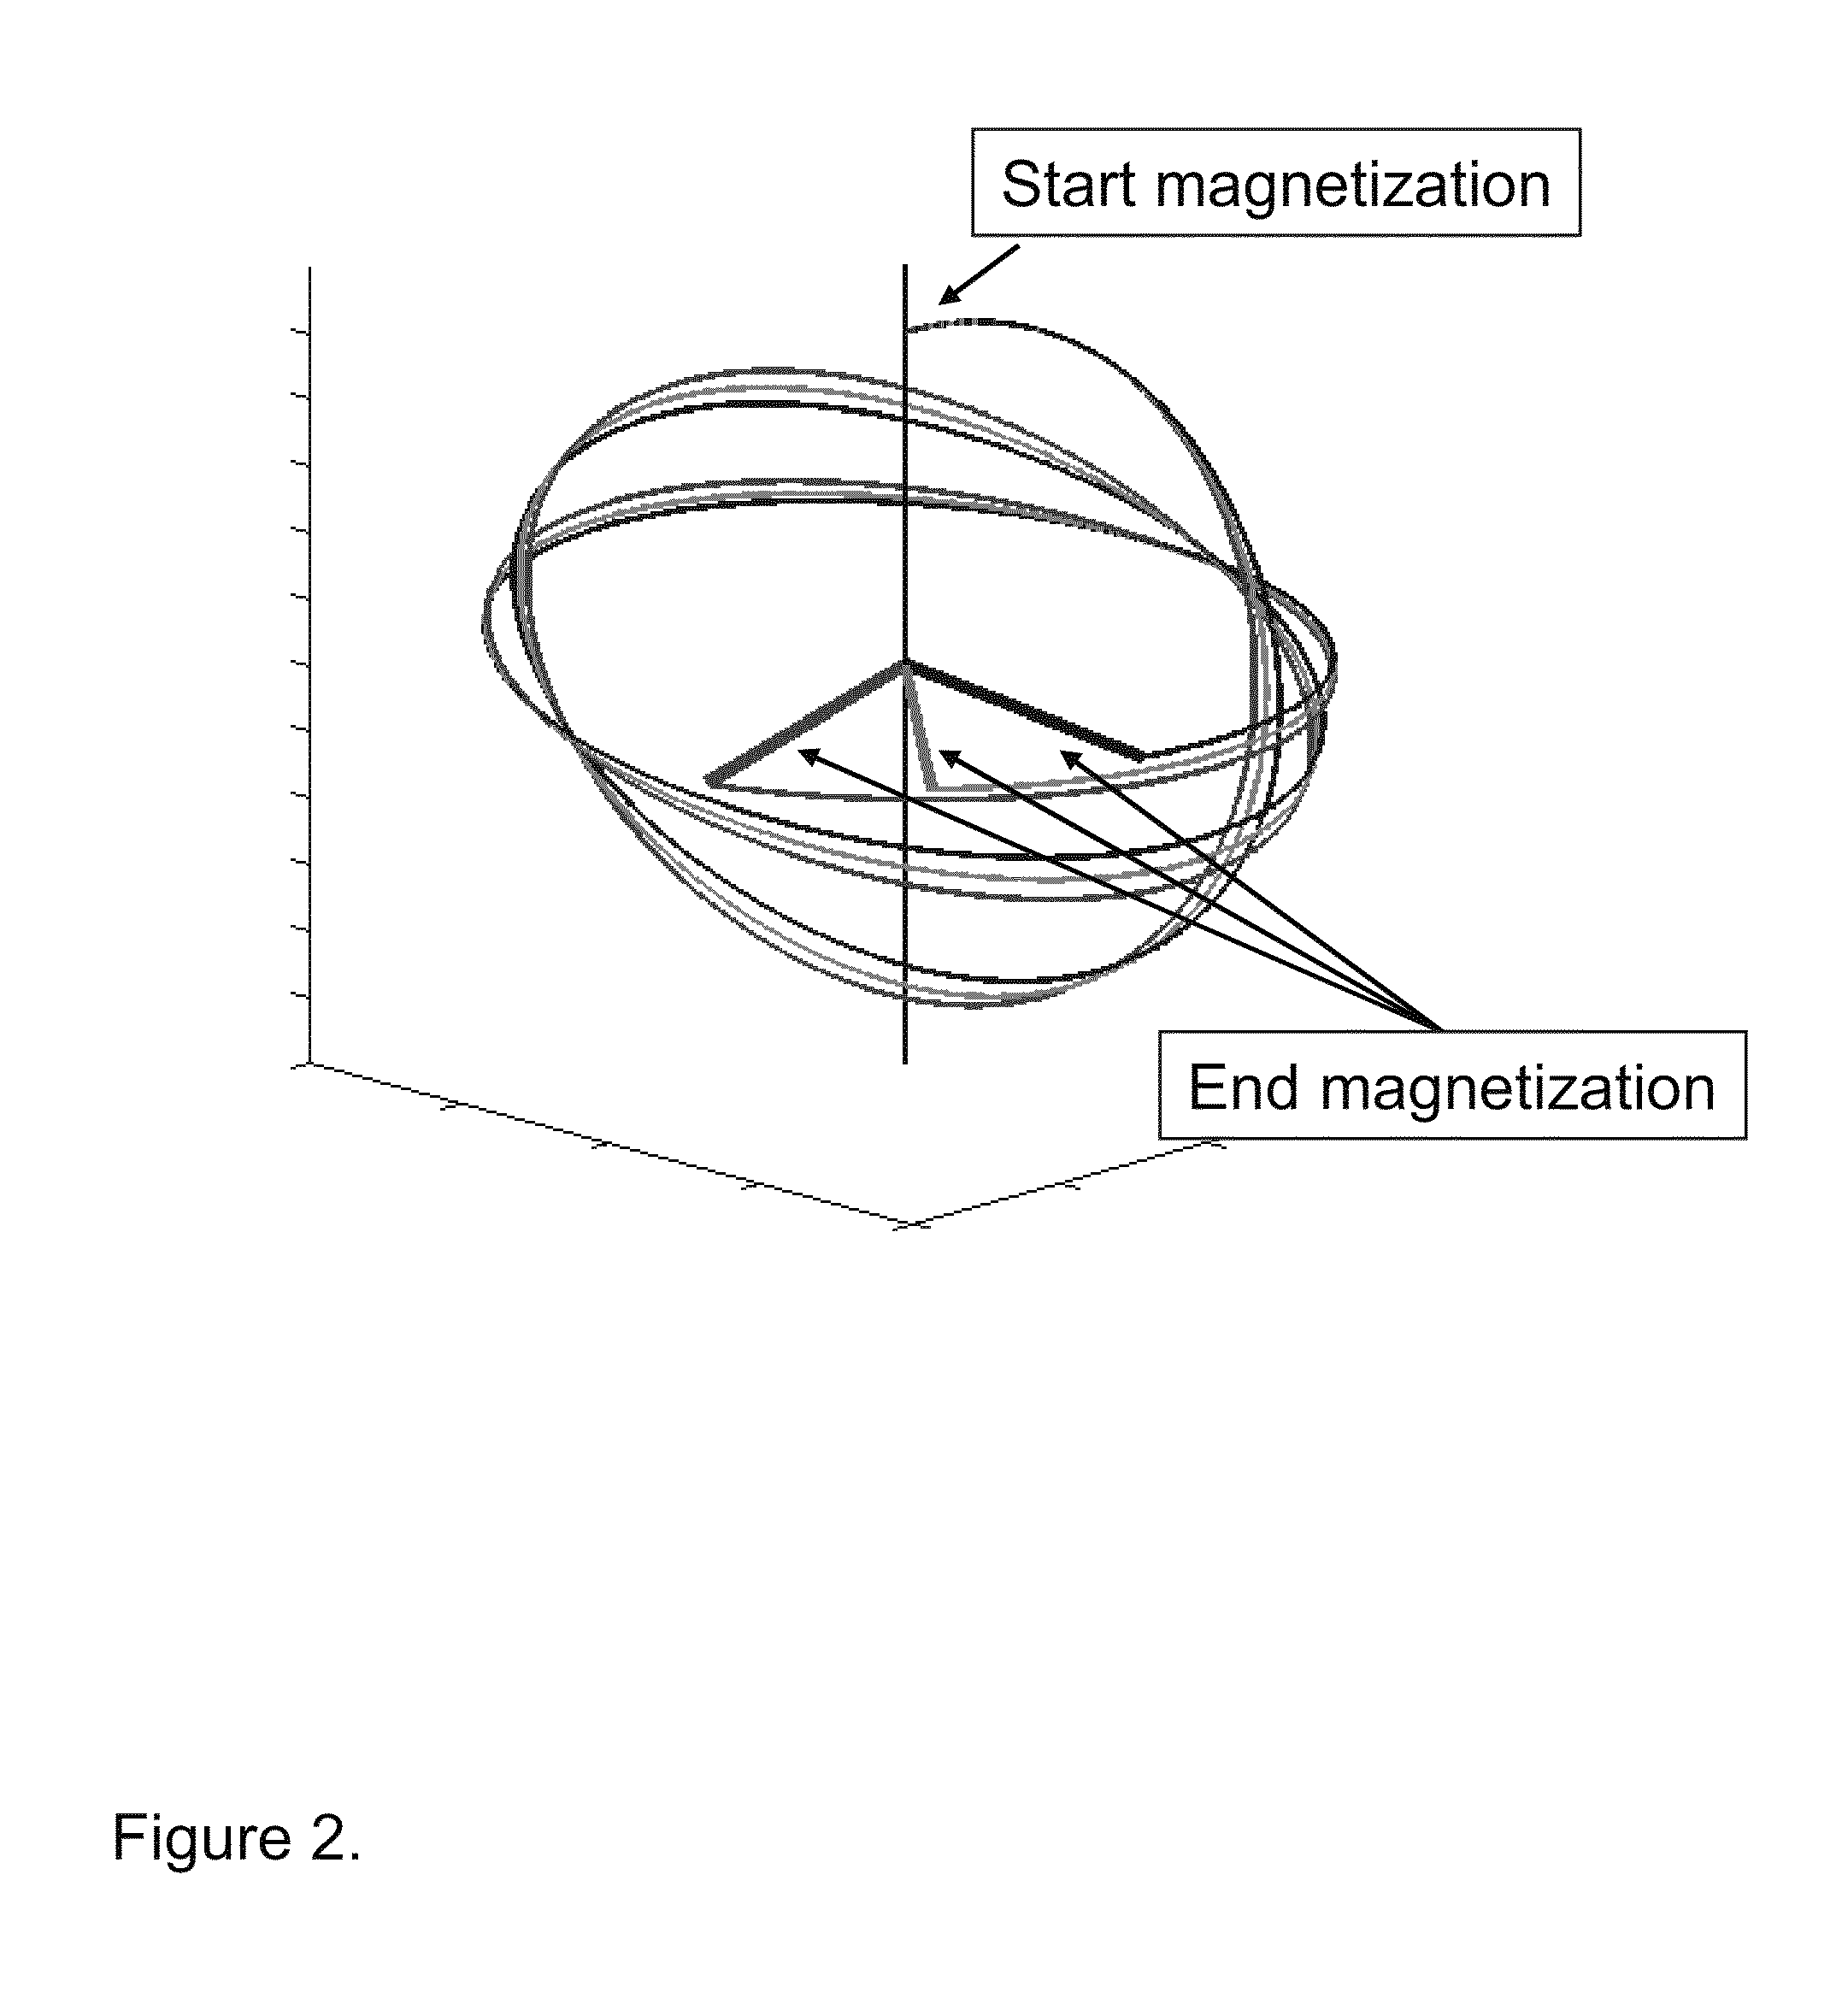 Method for mapping of the radio frequency field amplitude in a magnetic resonance imaging system using adiabatic excitation pulses